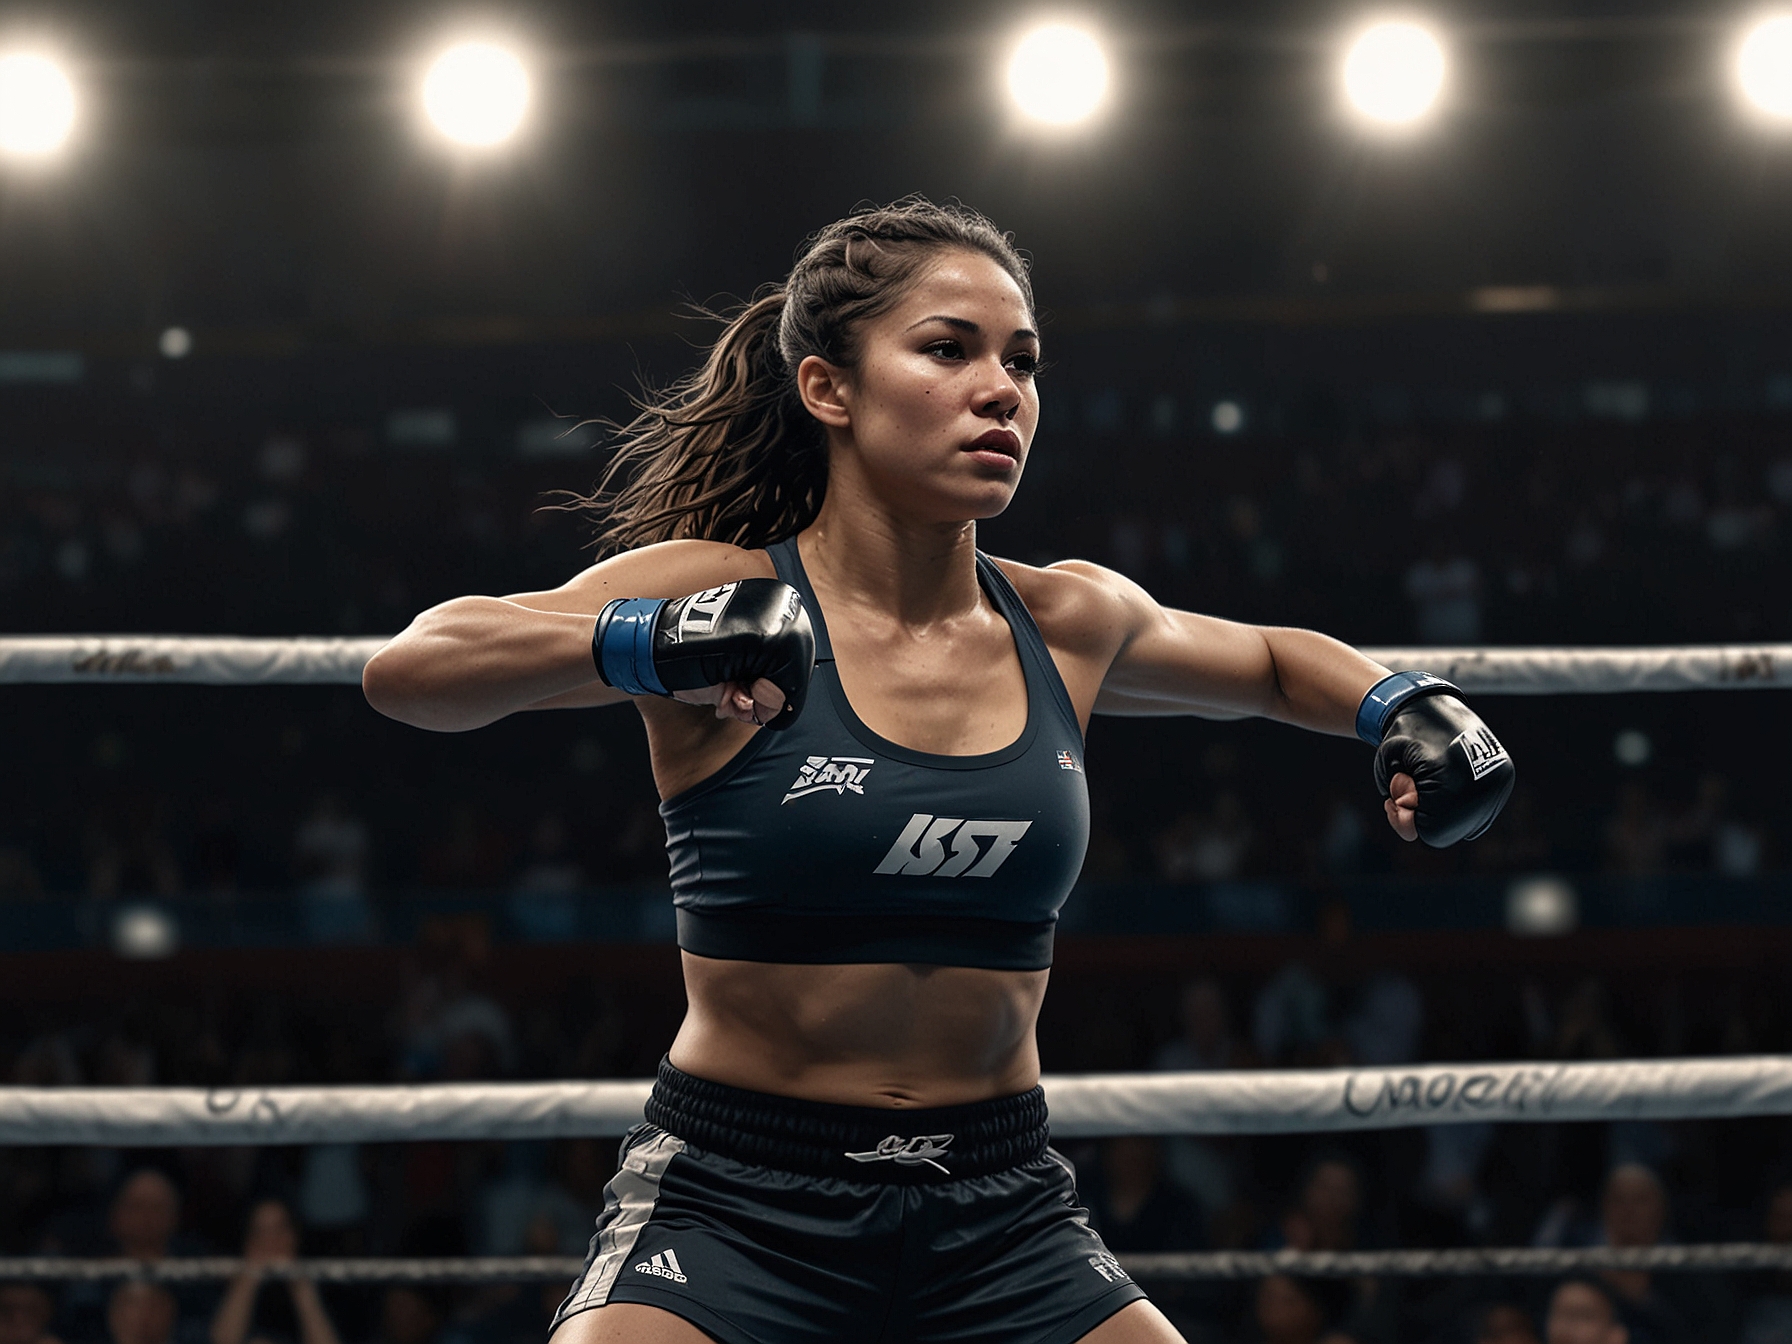 Ailin Perez performing her signature post-victory dance move in the ring, highlighting her charismatic showmanship and rising visibility in the MMA scene.